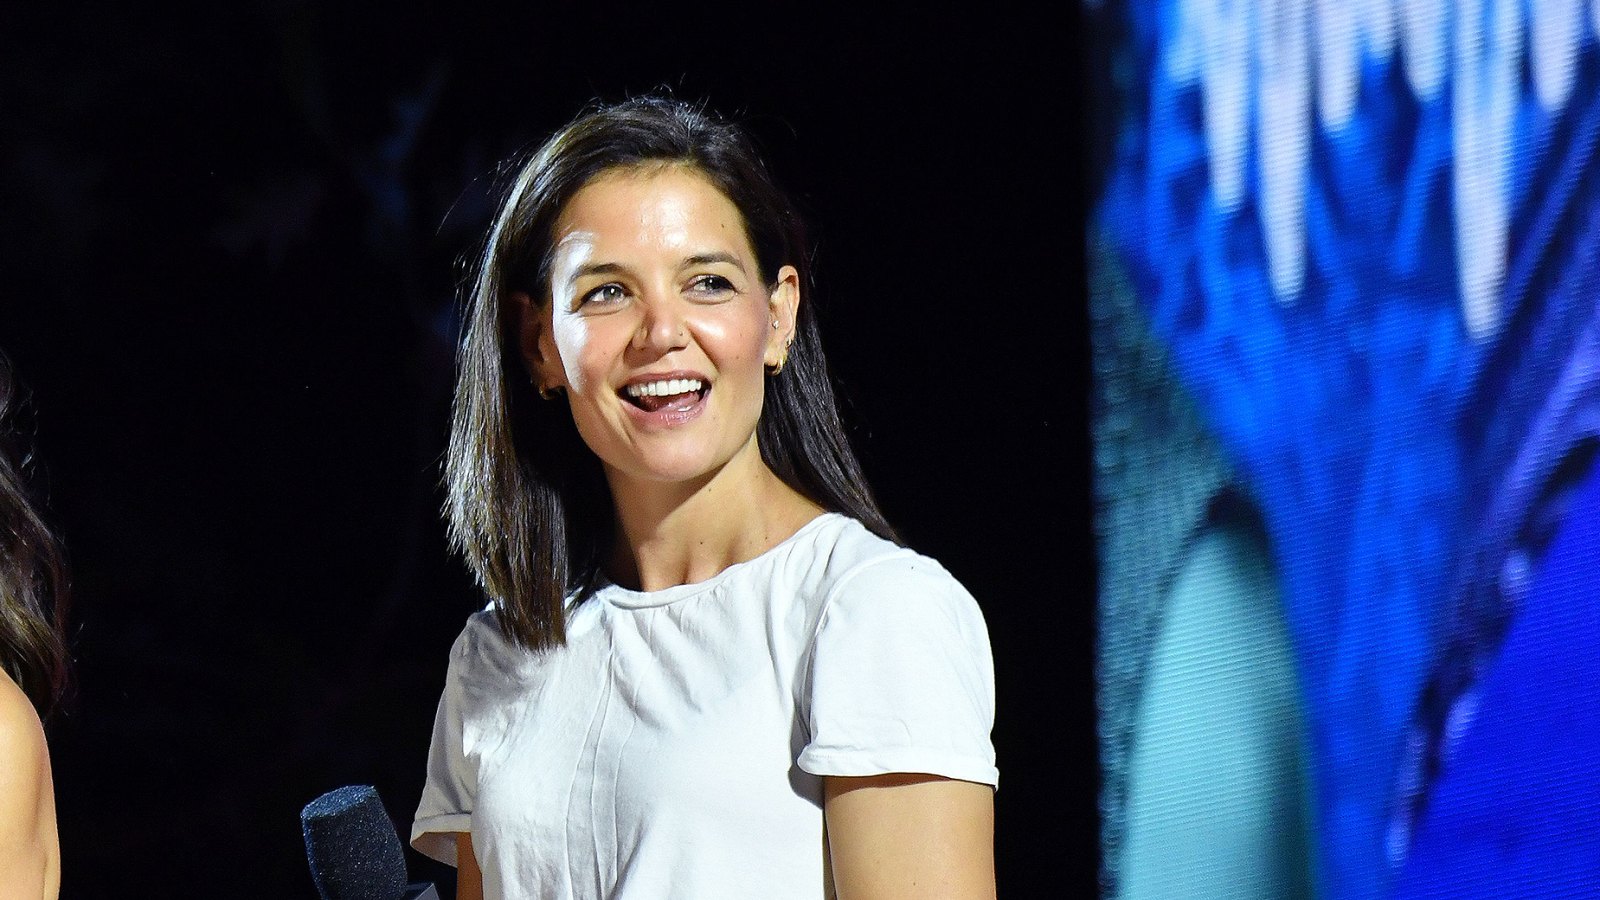 Katie Holmes Wore These Champion Fleece Joggers in NYC